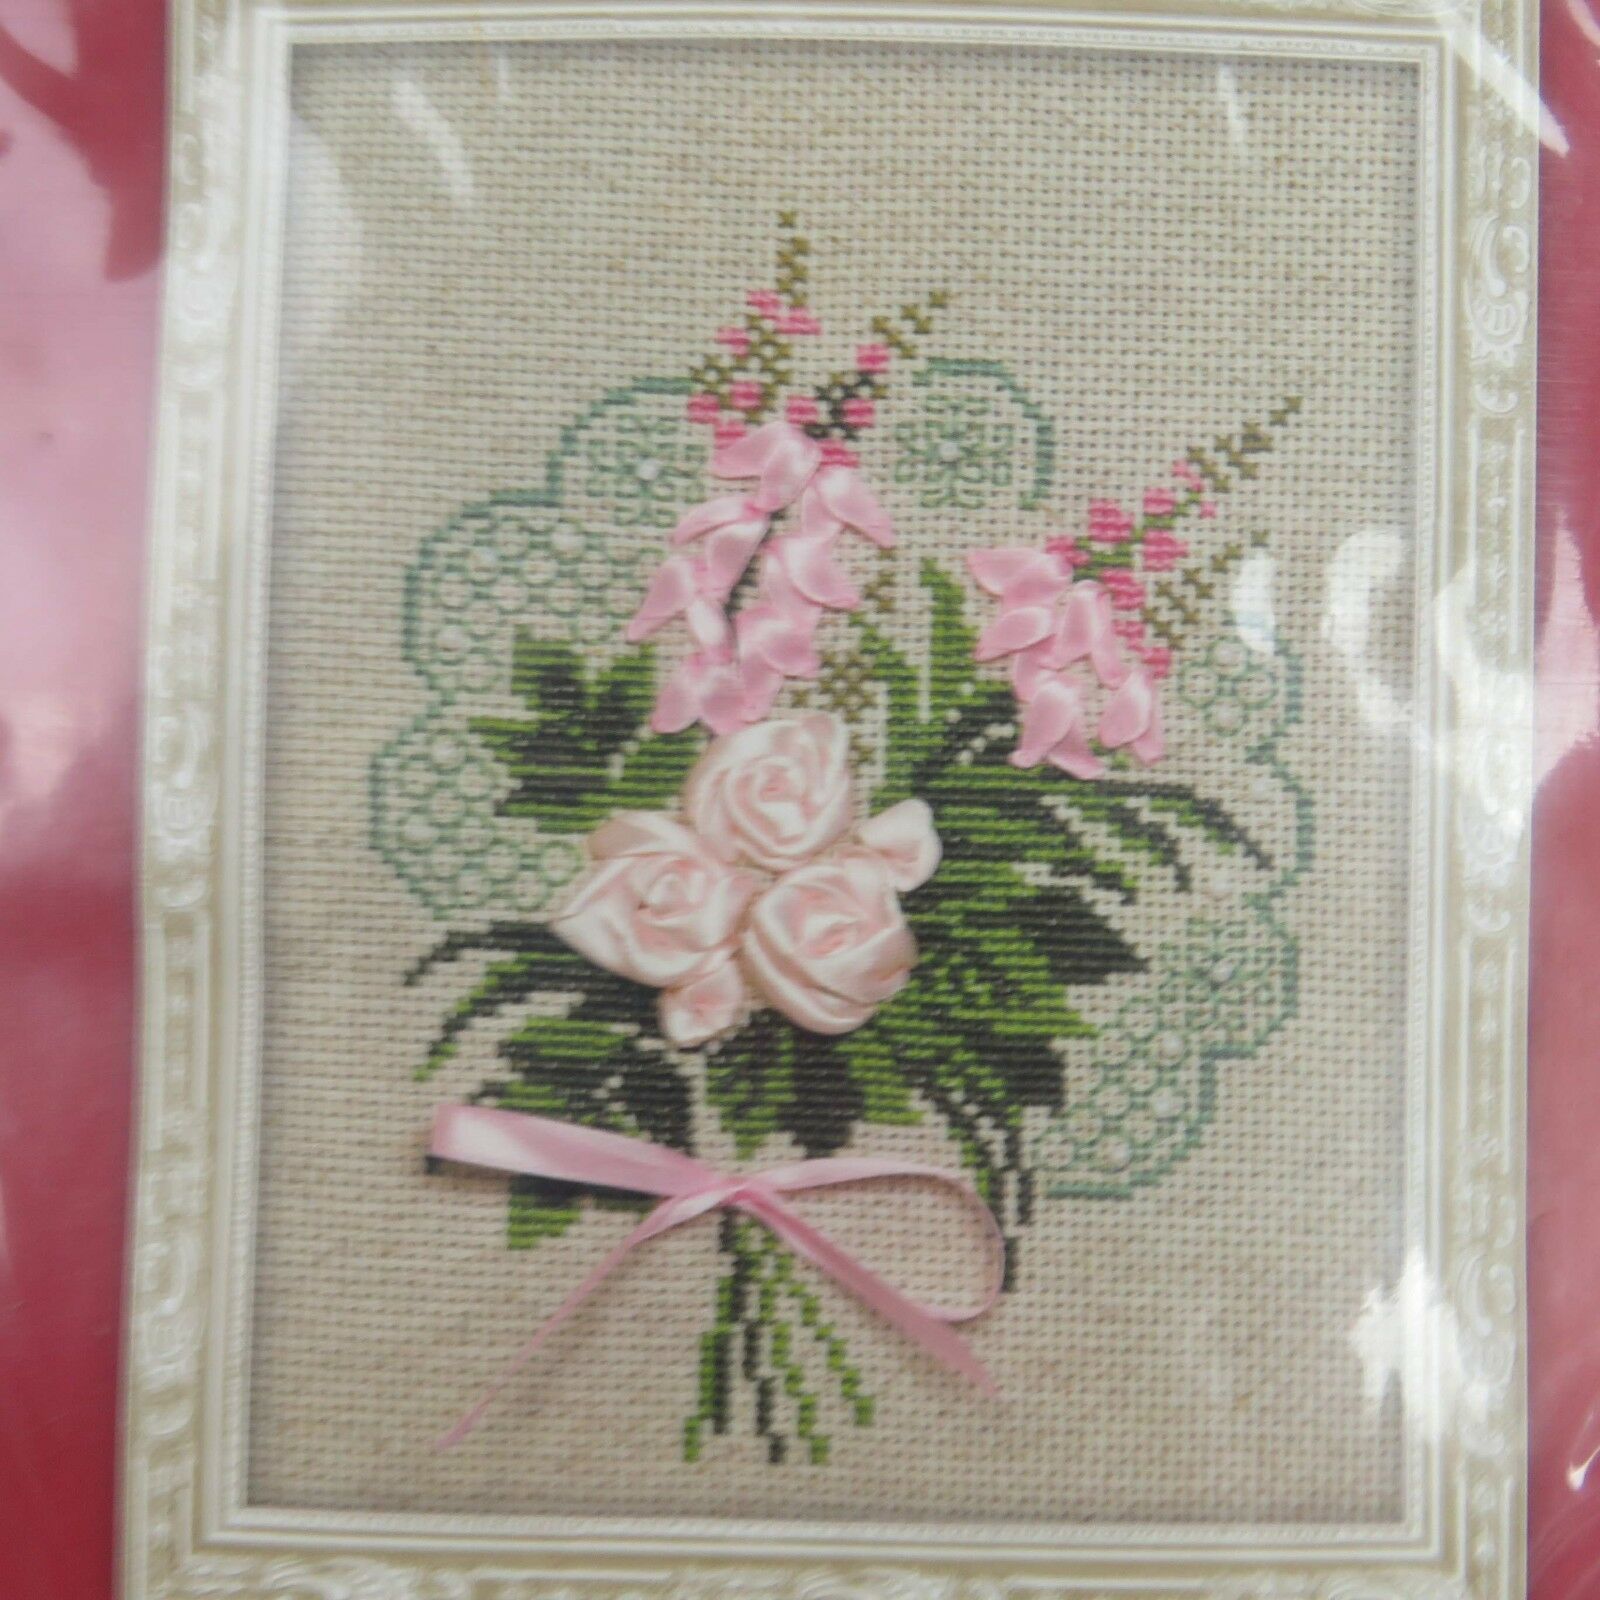 Floral Flowers Riolis Cross Stitch and Ribbon Embroidery Kits Roses Set of 2 New - At Grandma's Table